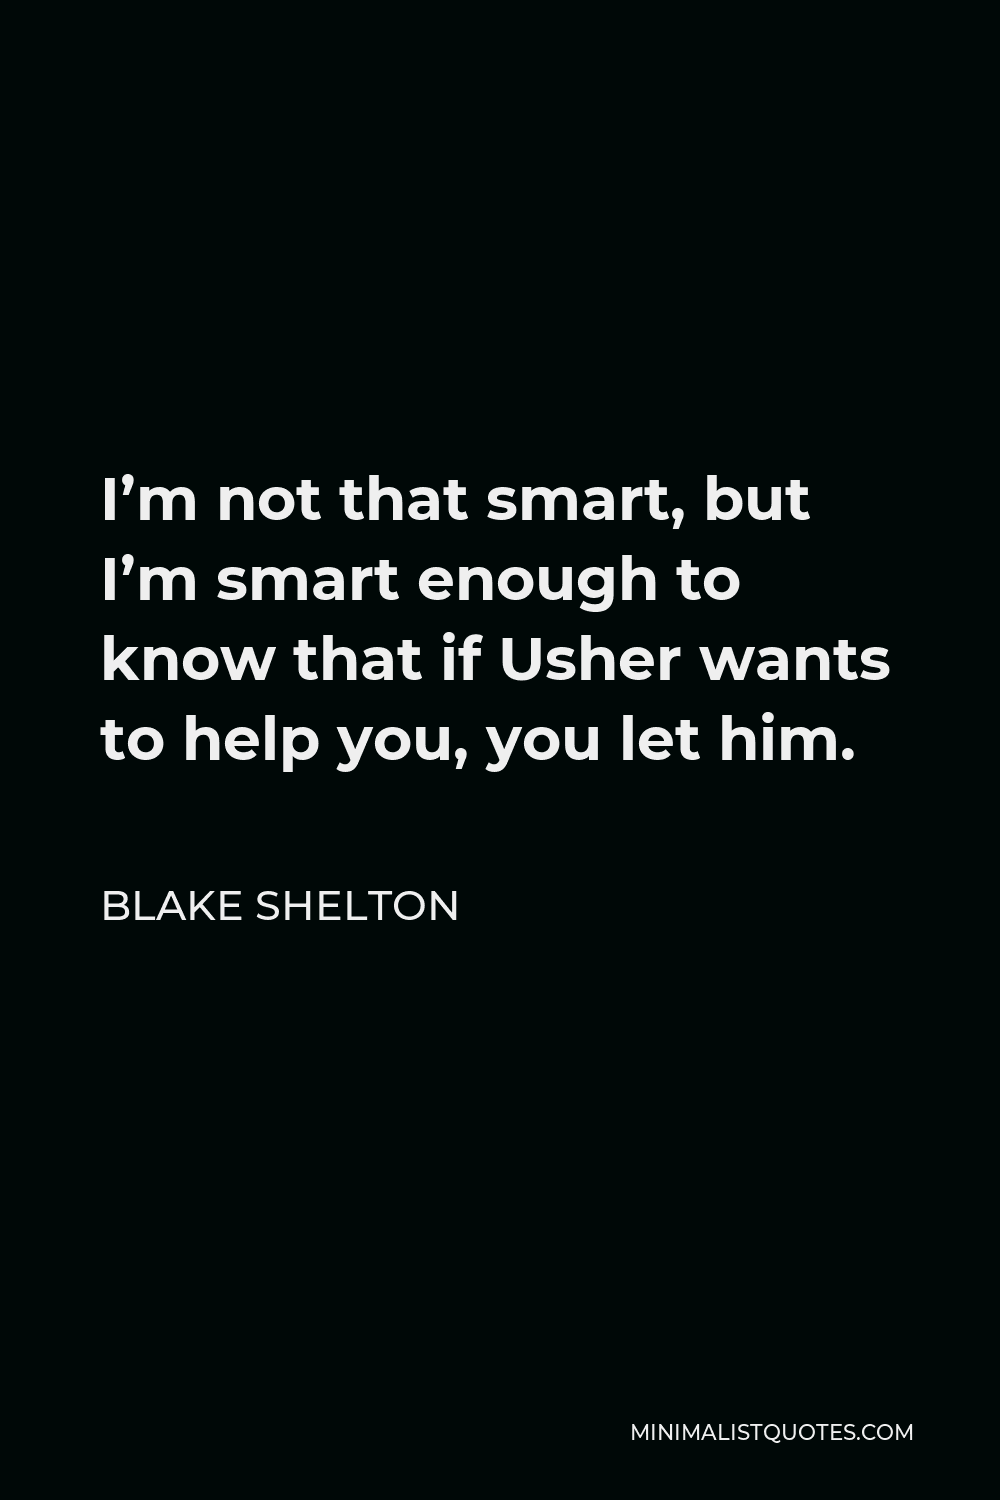 Blake Shelton Quote - I’m not that smart, but I’m smart enough to know that if Usher wants to help you, you let him.